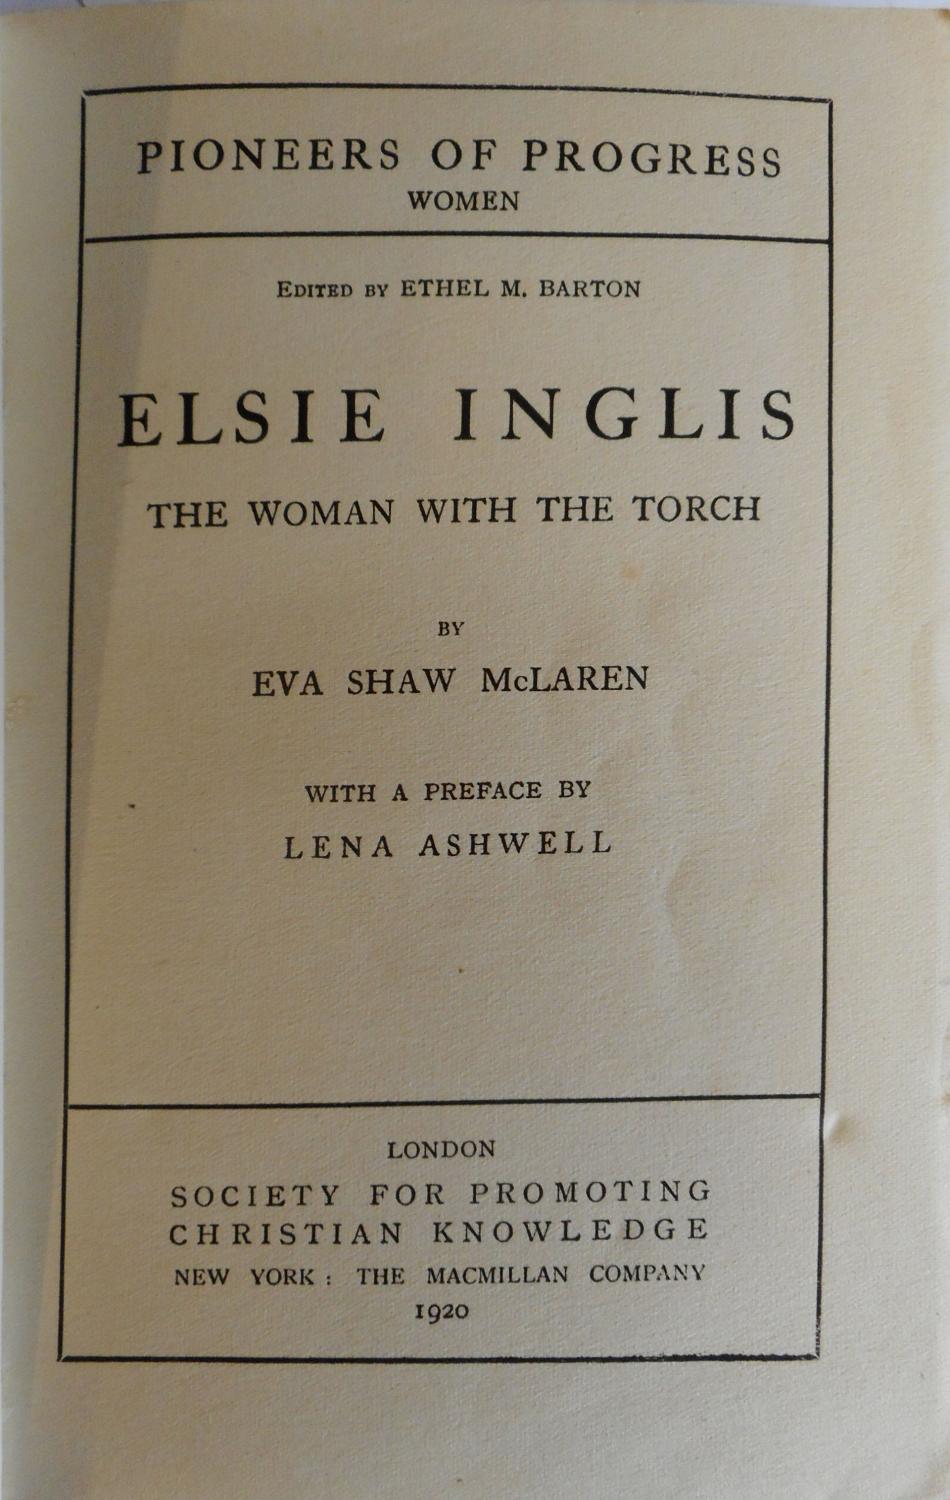 The Woman with the Torch - Elsie Inglis - title page (SPCK) (image)